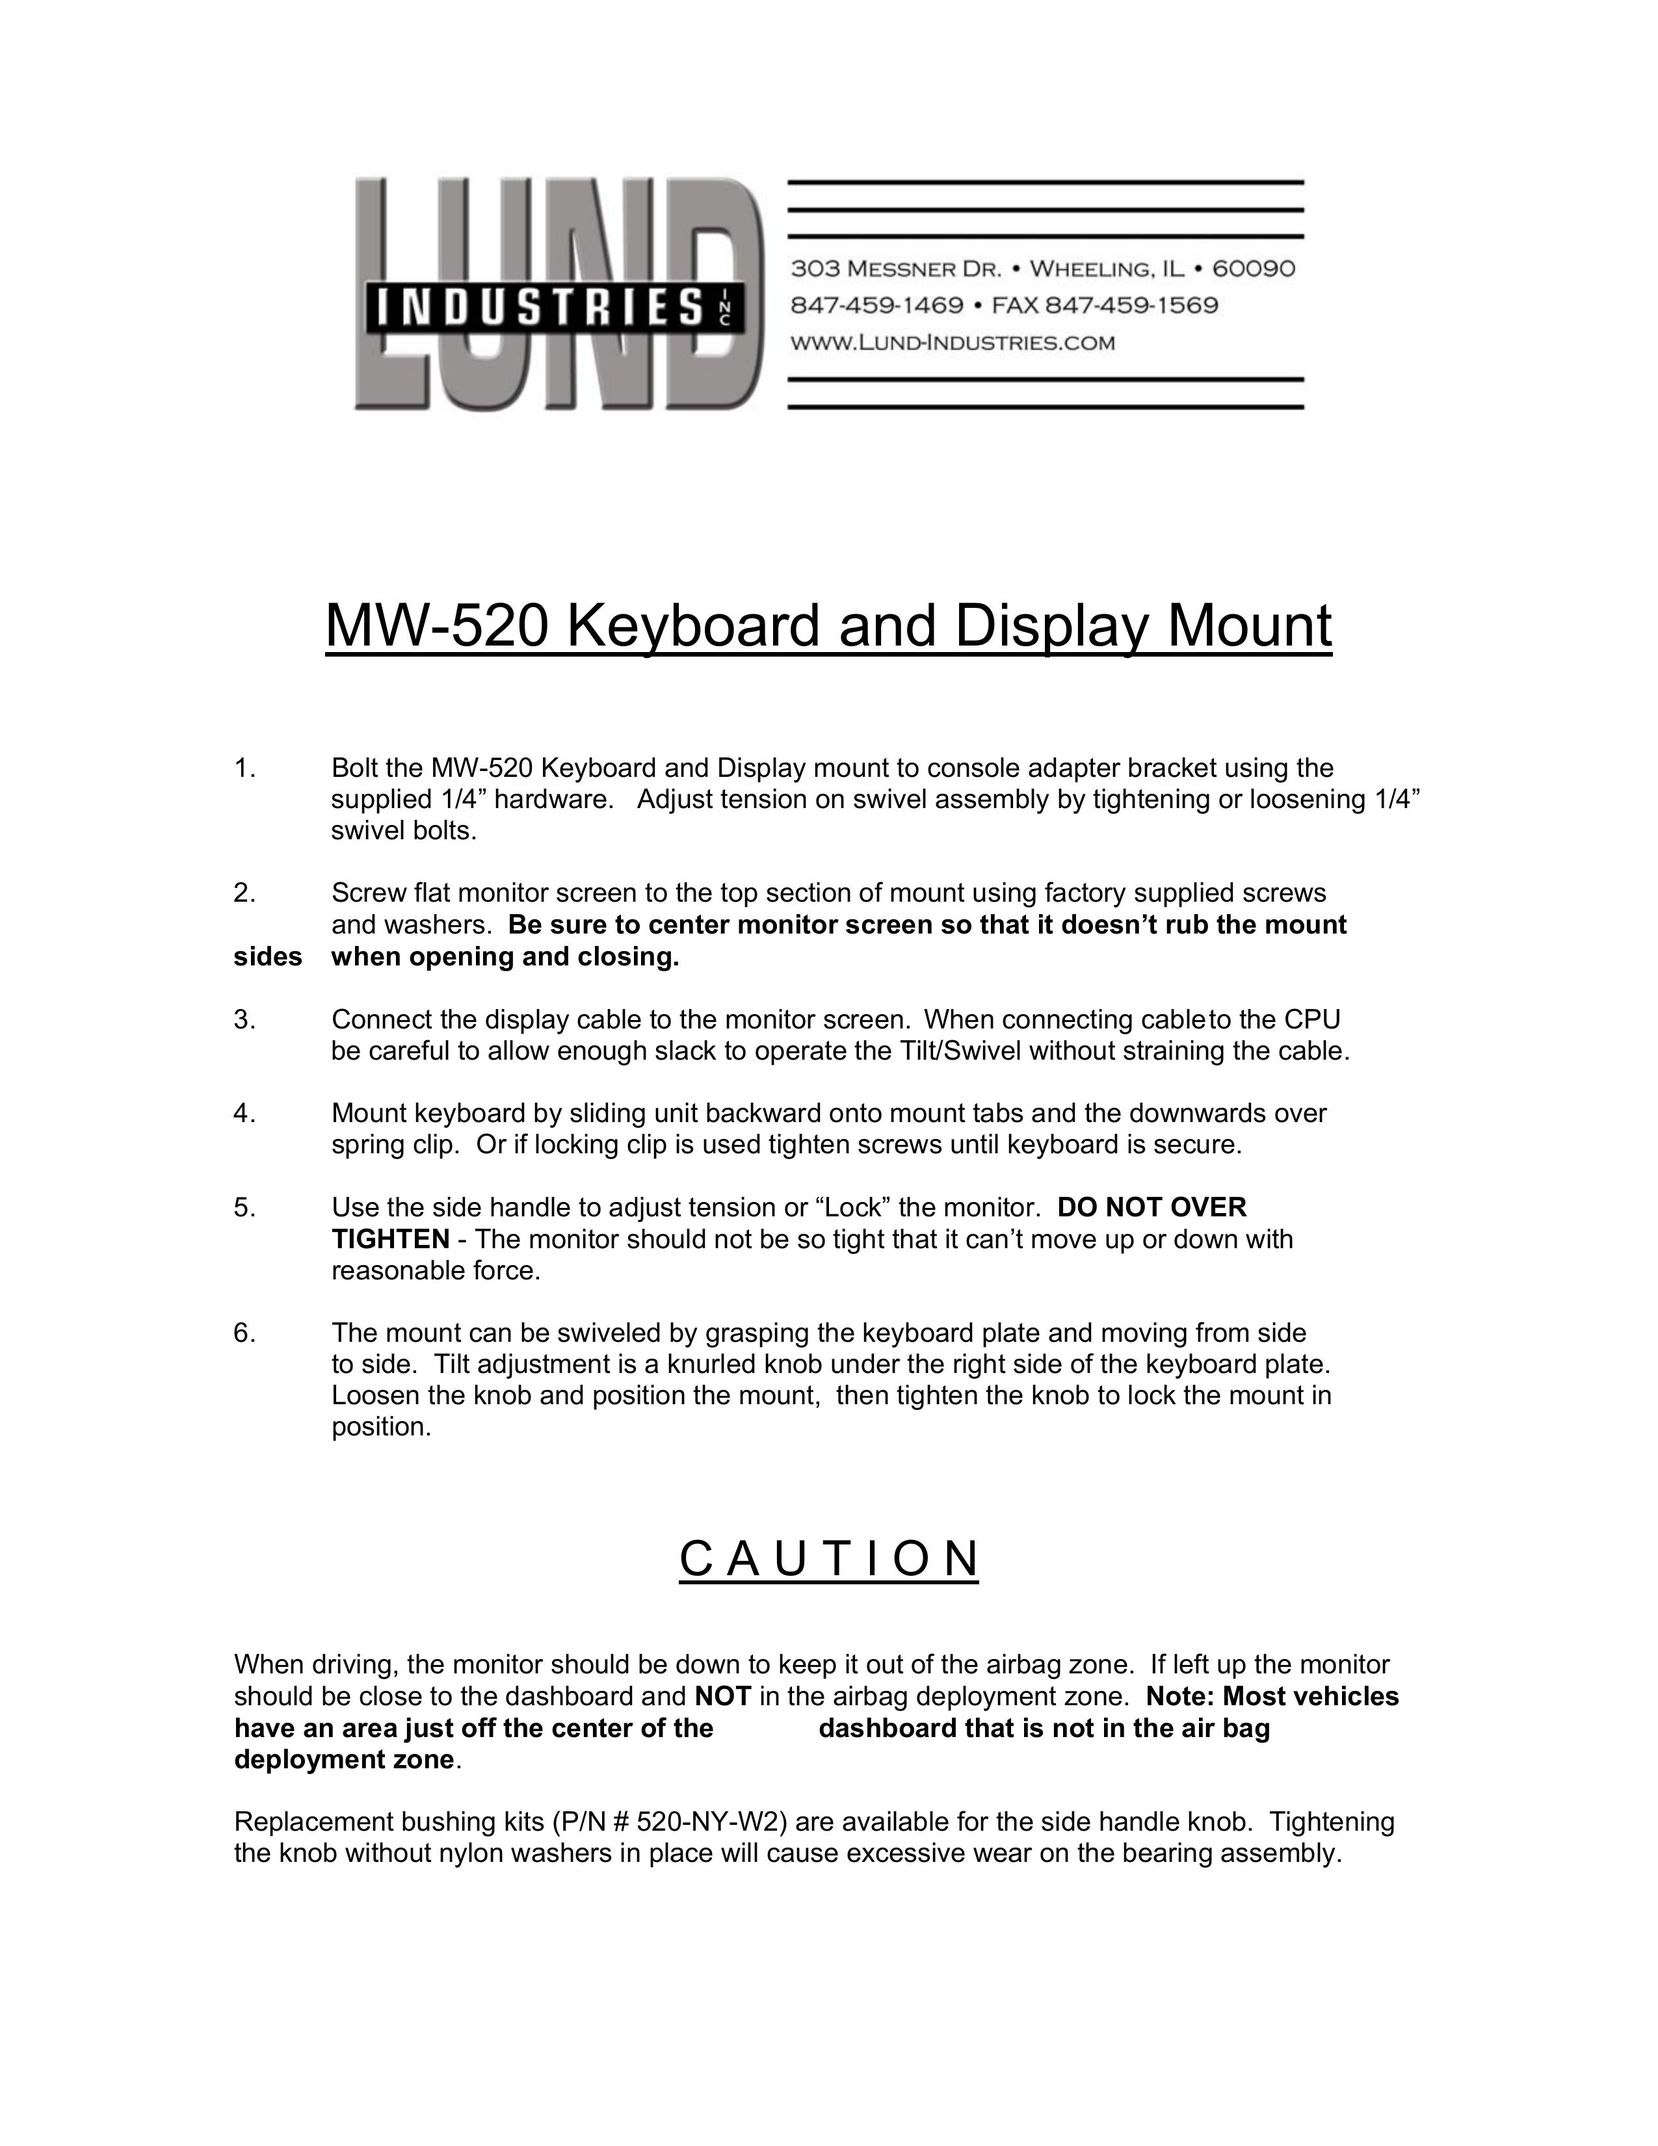 Lund Industries MW520 Mouse User Manual